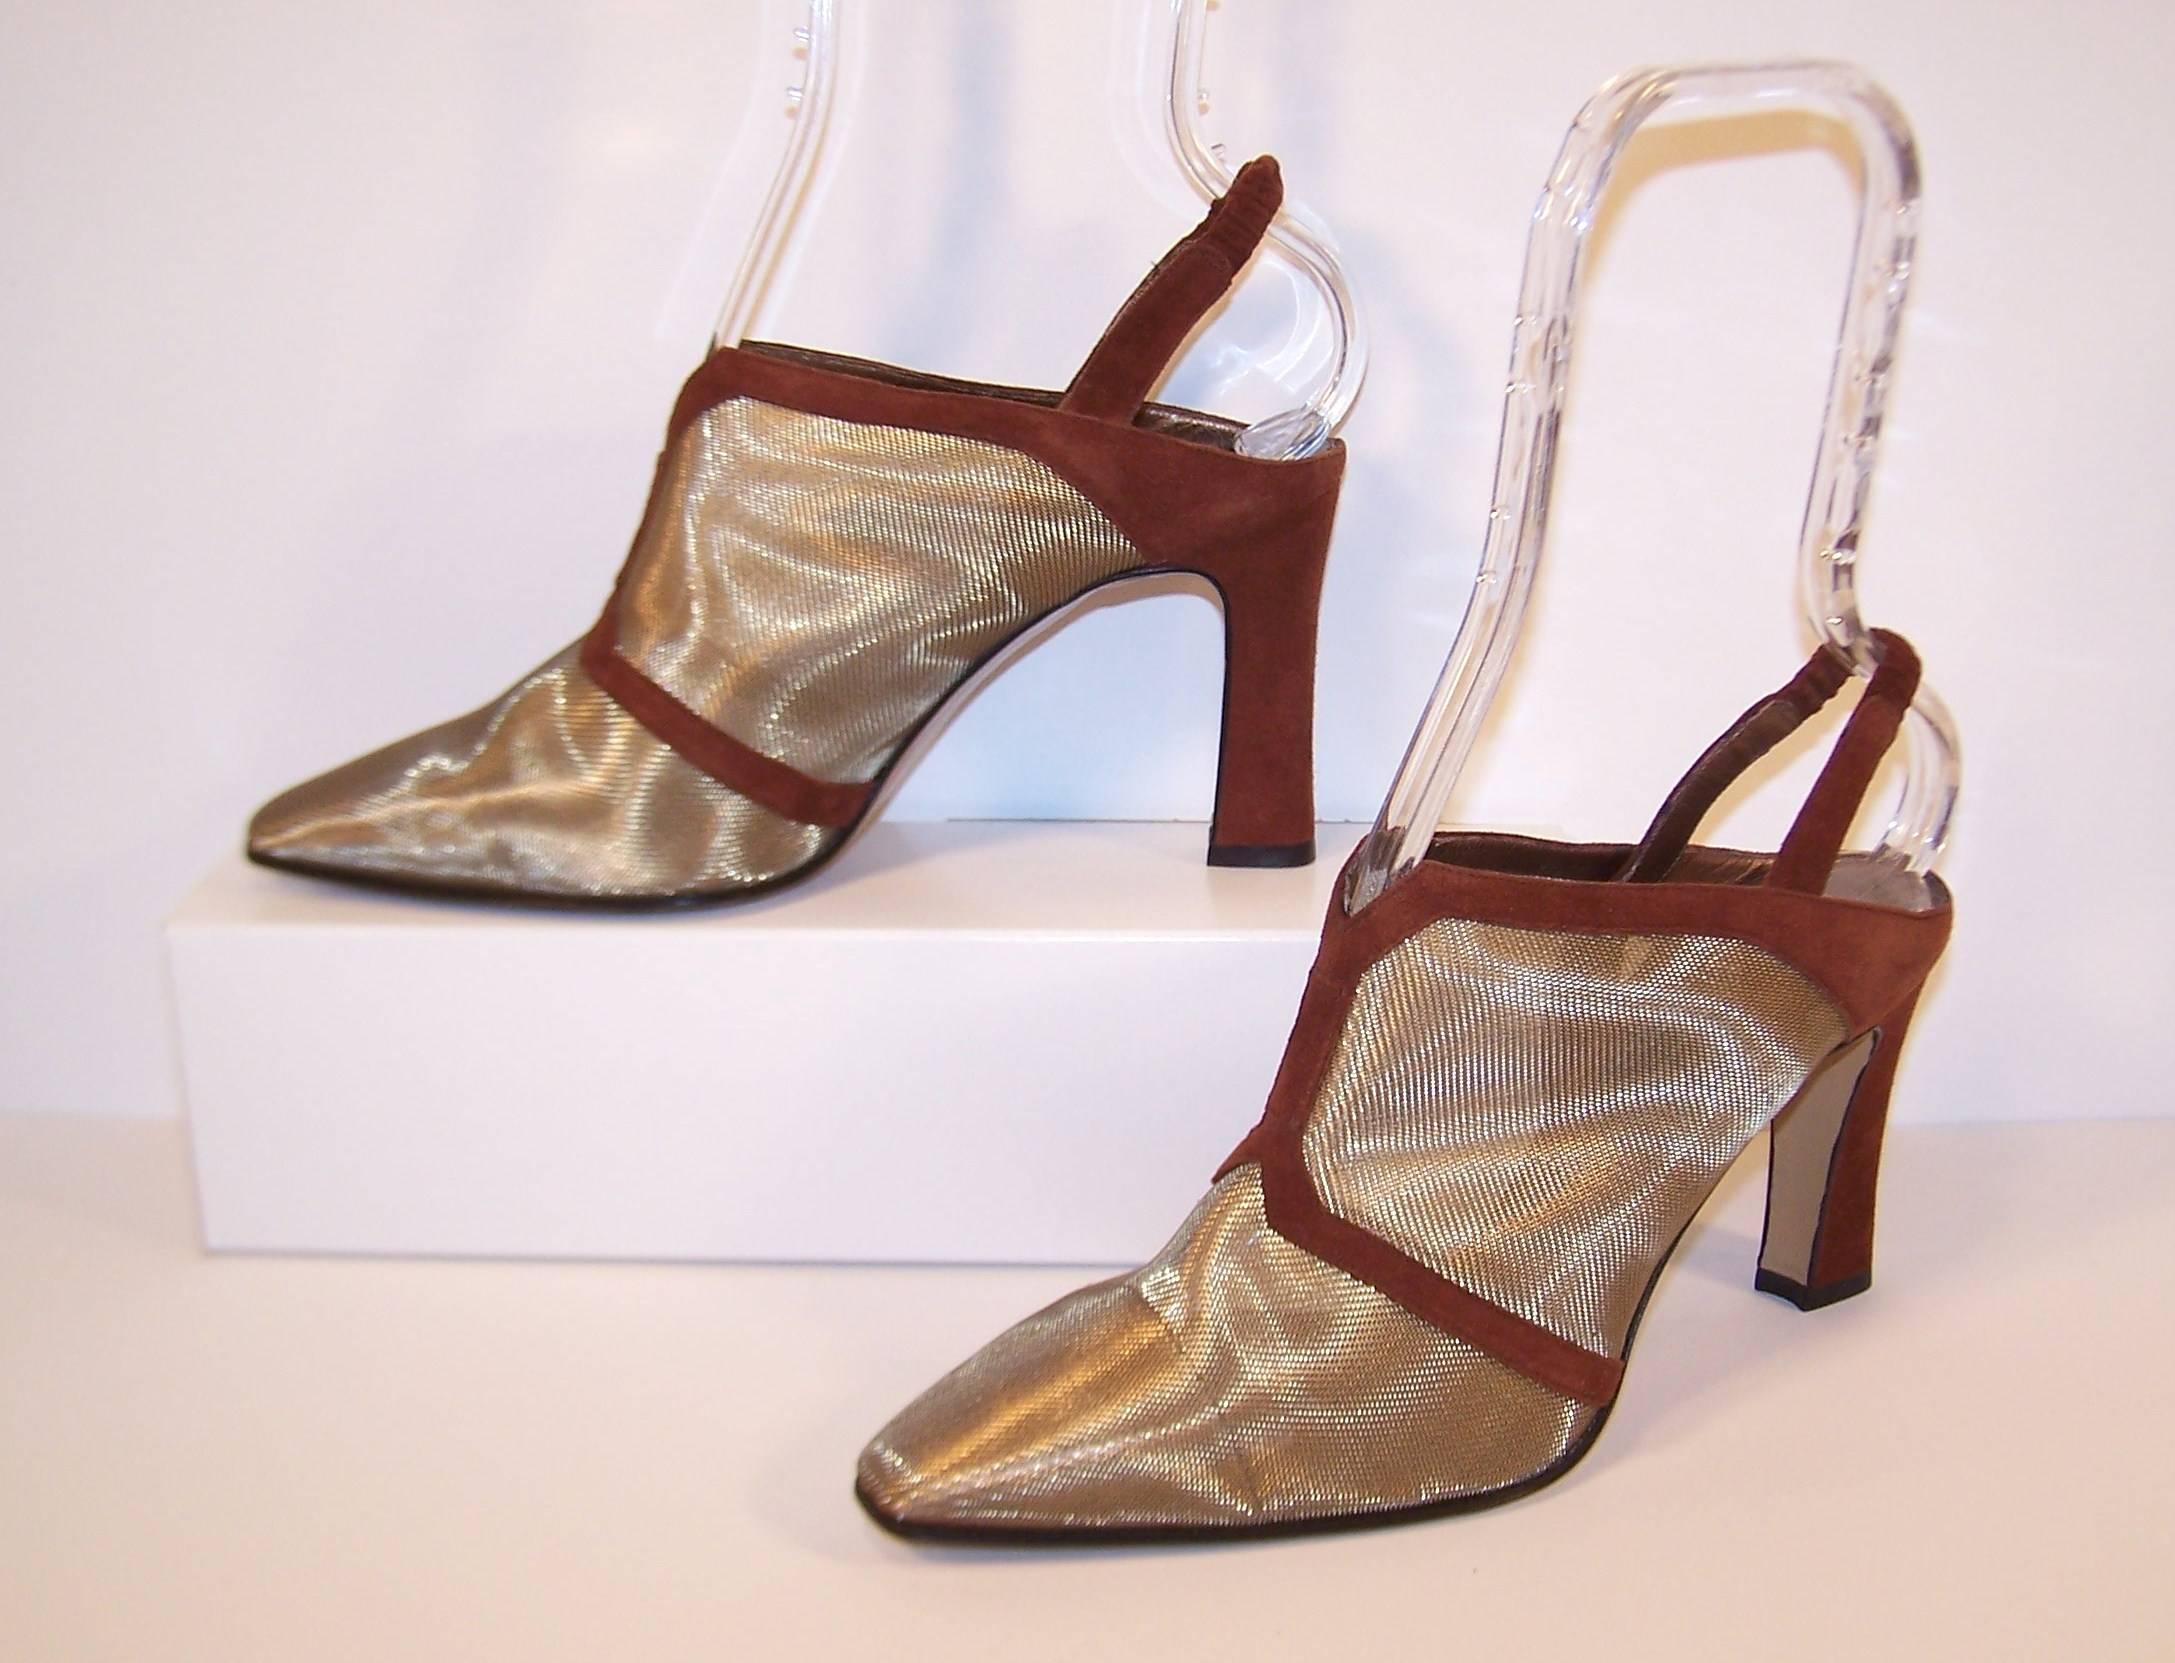 This slingback shoe by Comcedia has the look of a fierce bootie.  The body of the shoe is formed of fine gold mesh resembling a screen.  It is trimmed in chocolate brown suede with a covered elasticized slingback.  Both the slingback and 3.5"